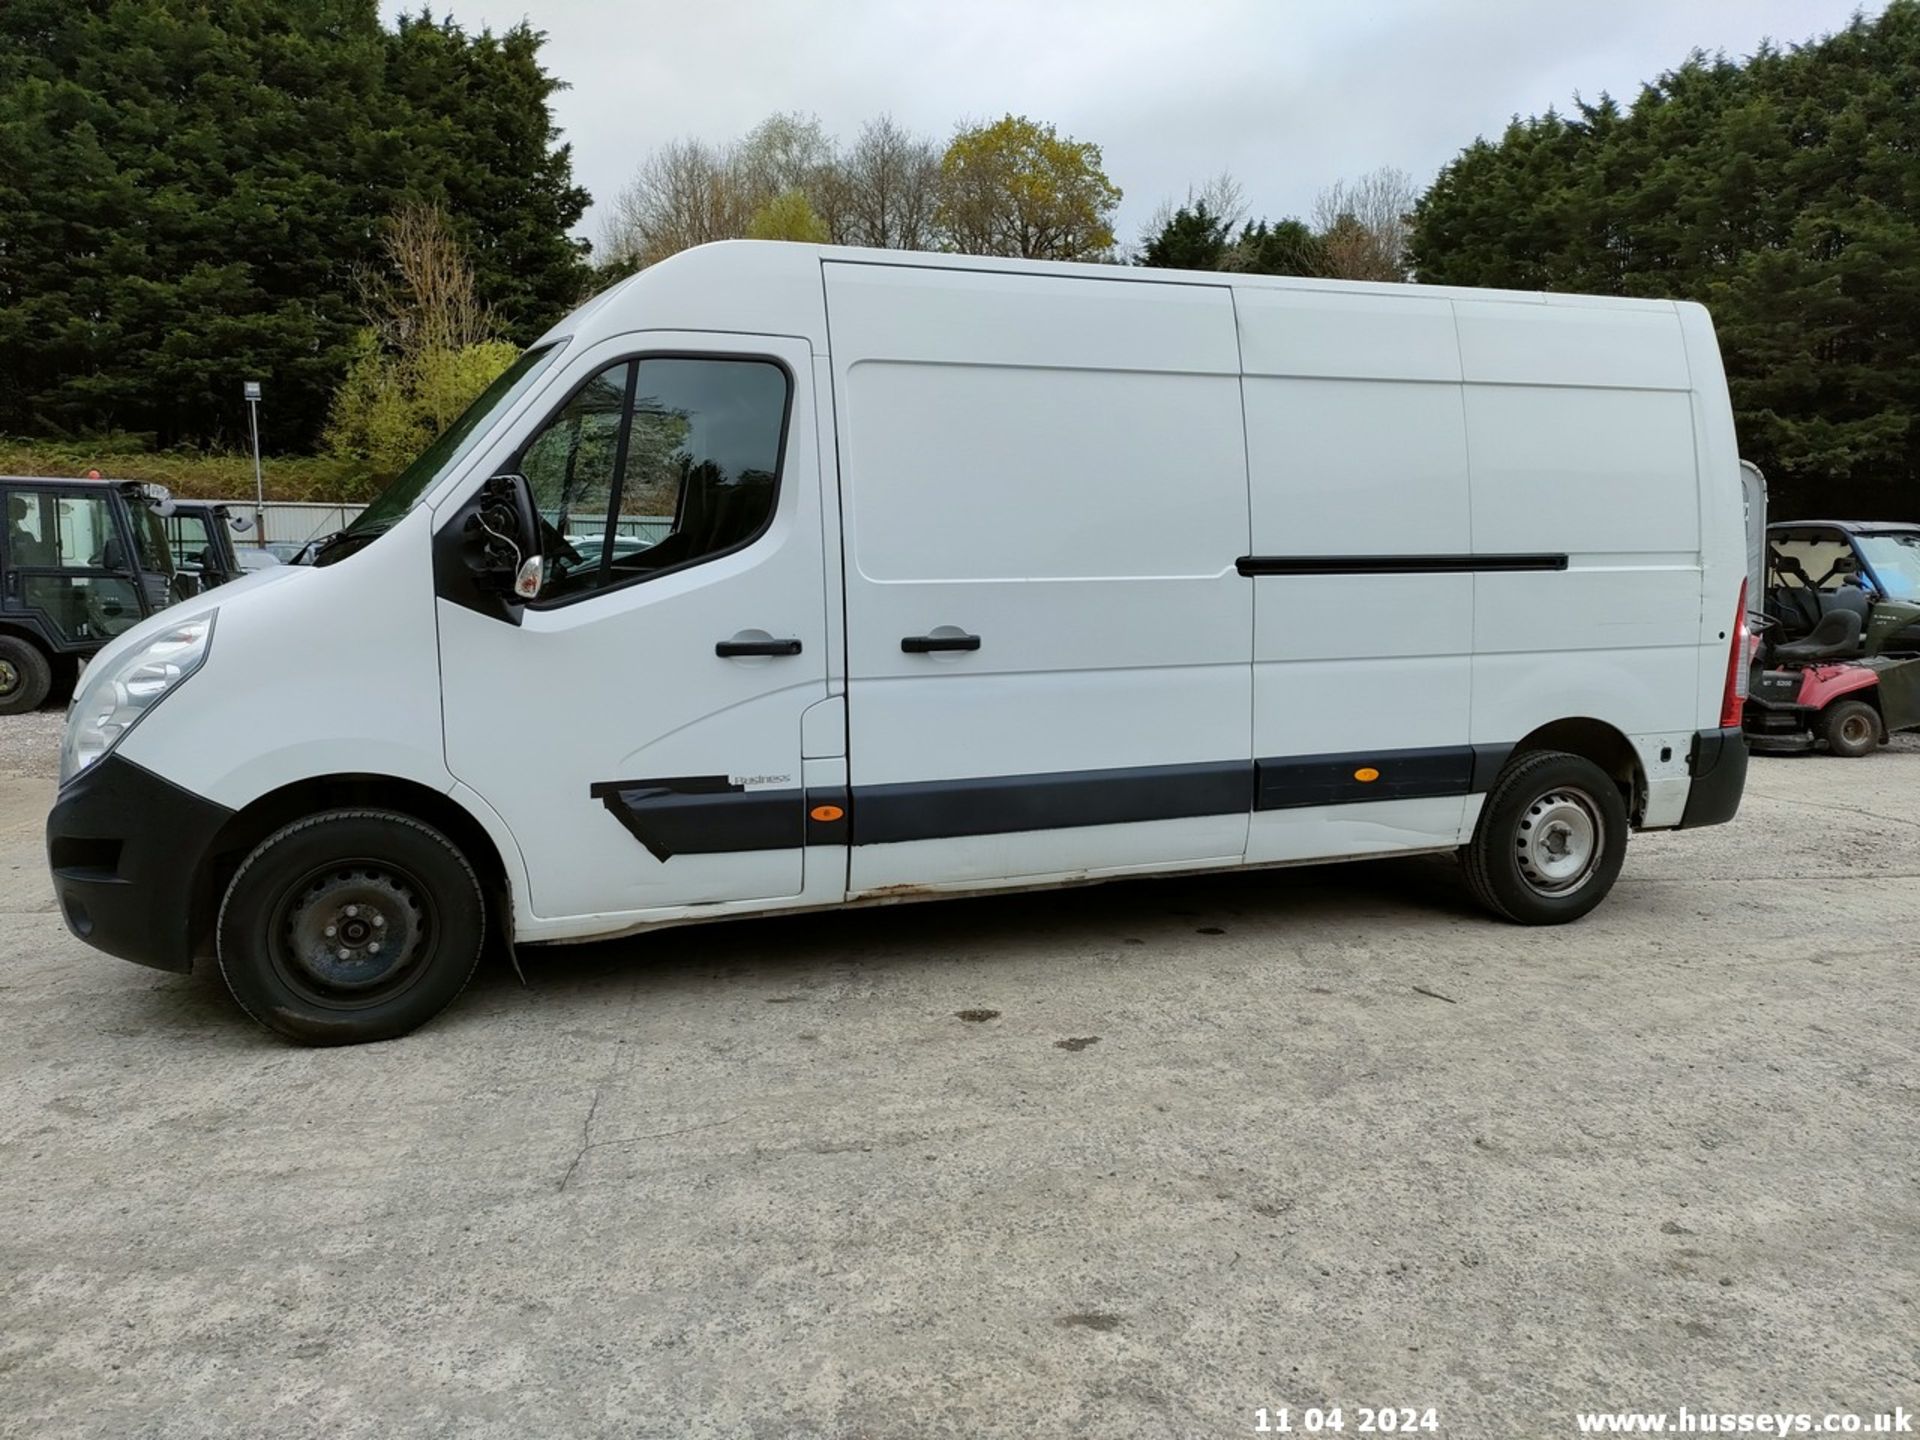 18/68 RENAULT MASTER LM35 BUSINESS DCI - 2298cc 5dr Van (White) - Image 19 of 68